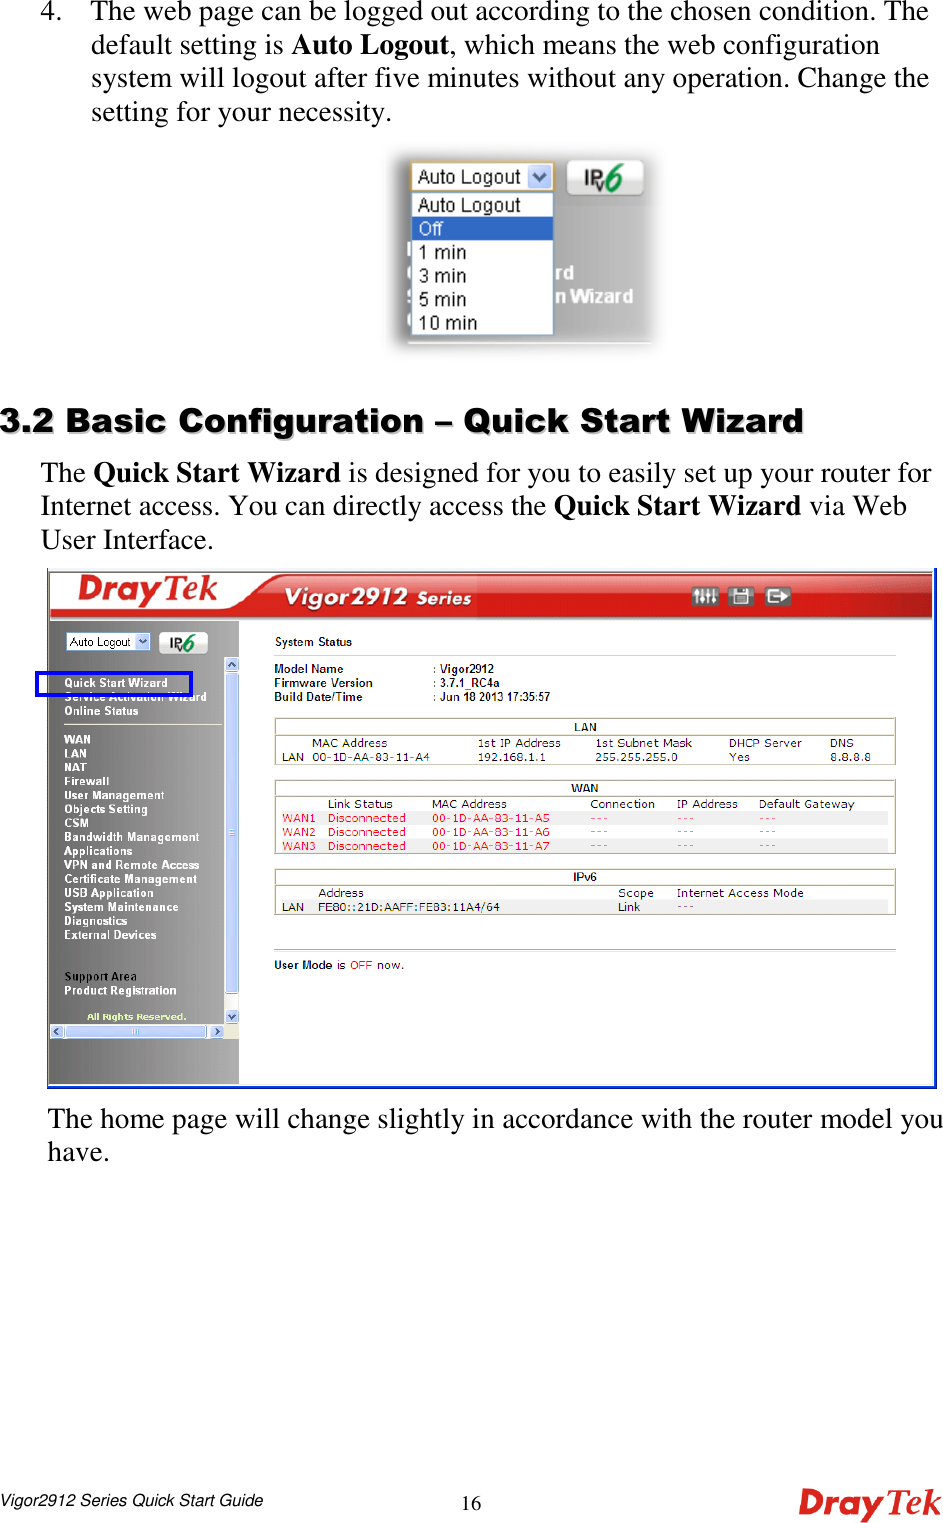  Vigor2912 Series Quick Start Guide 164. The web page can be logged out according to the chosen condition. The default setting is Auto Logout, which means the web configuration system will logout after five minutes without any operation. Change the setting for your necessity.   33..22  BBaassiicc  CCoonnffiigguurraattiioonn  ––  QQuuiicckk  SSttaarrtt  WWiizzaarrdd  The Quick Start Wizard is designed for you to easily set up your router for Internet access. You can directly access the Quick Start Wizard via Web User Interface.  The home page will change slightly in accordance with the router model you have. 